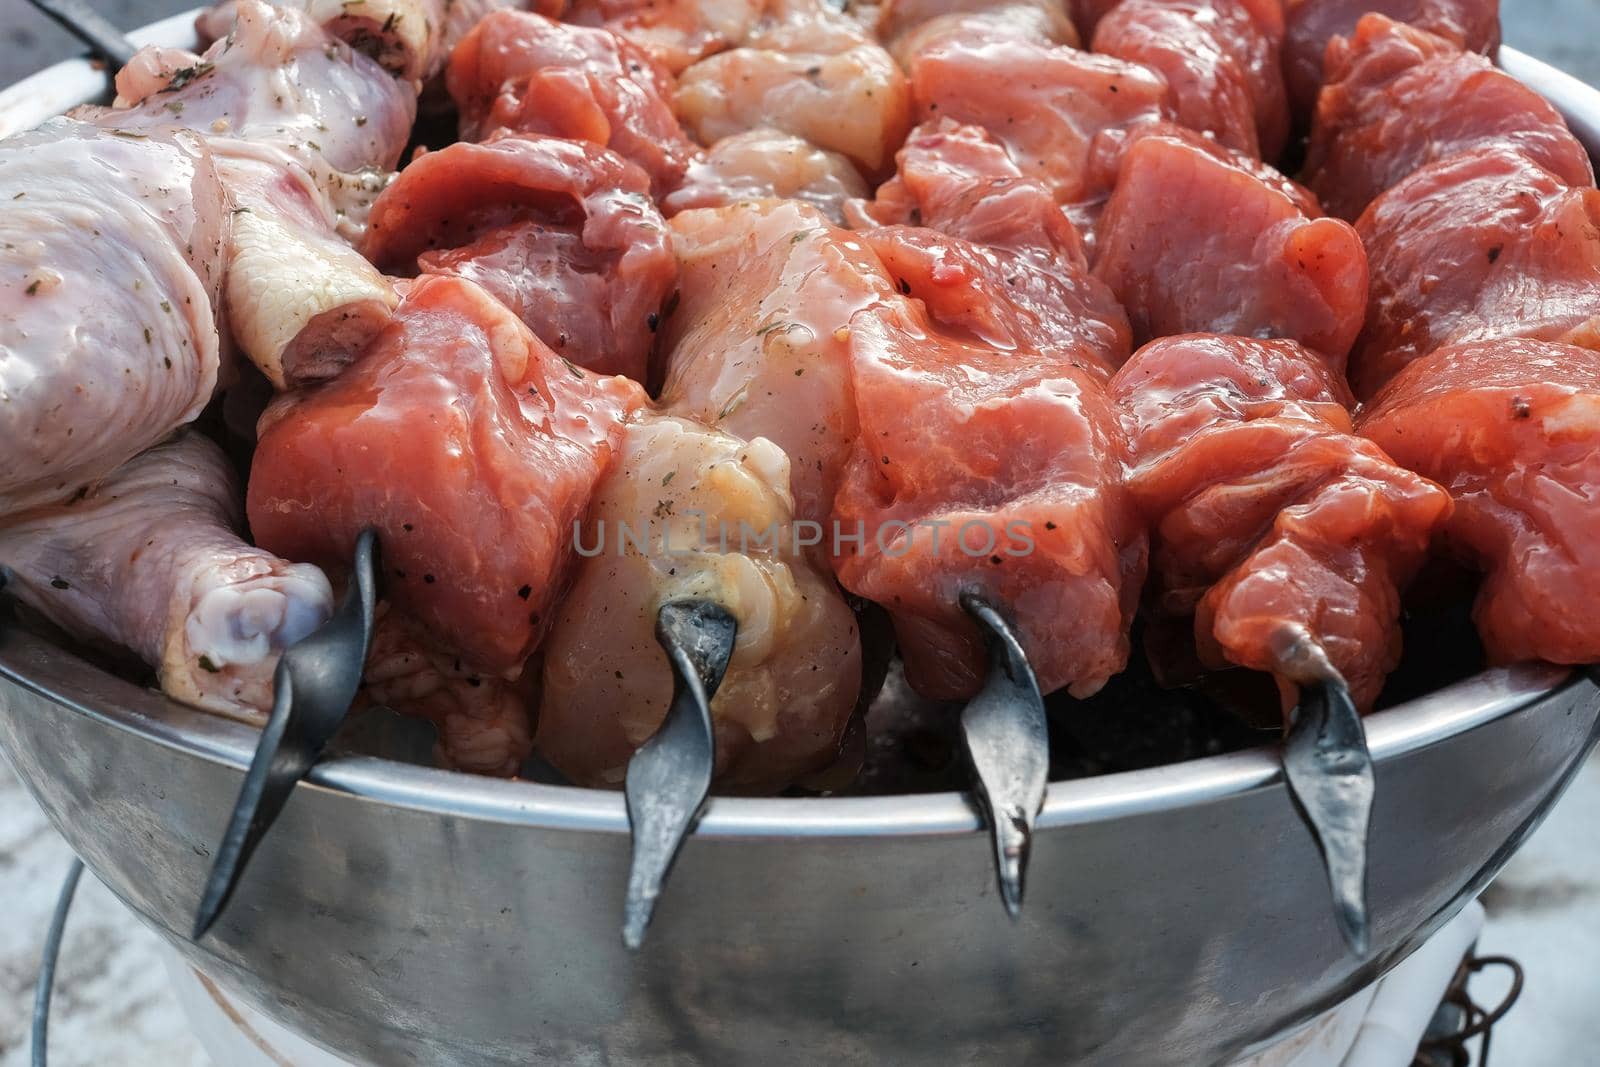 Raw pork skewers and chicken thighs cut into pieces and on skewers closeup.